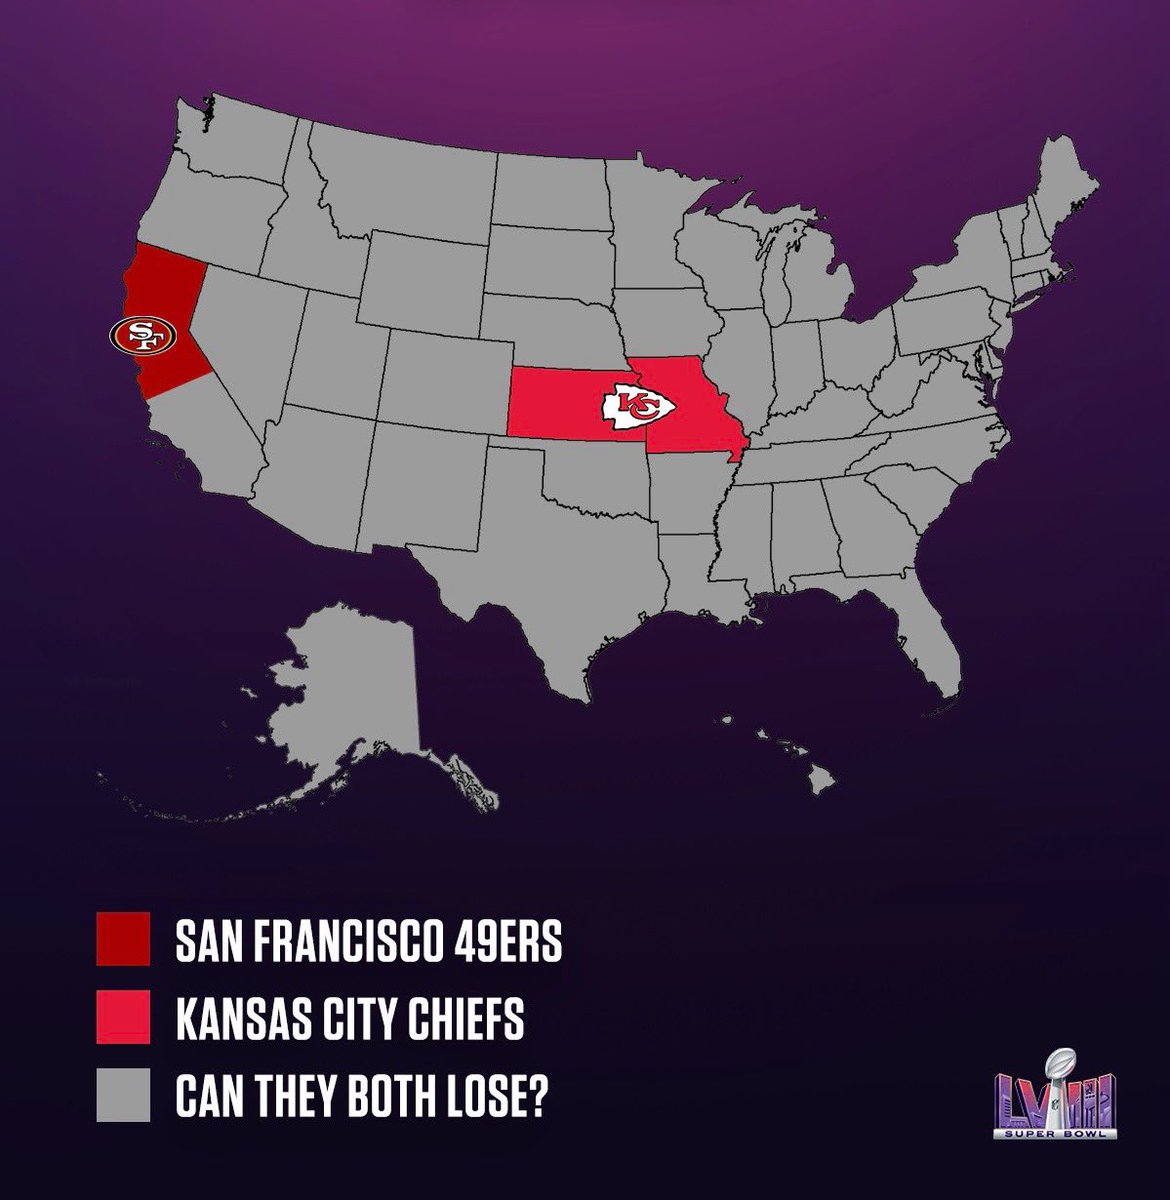 Who America is rooting for in the Super Bowl